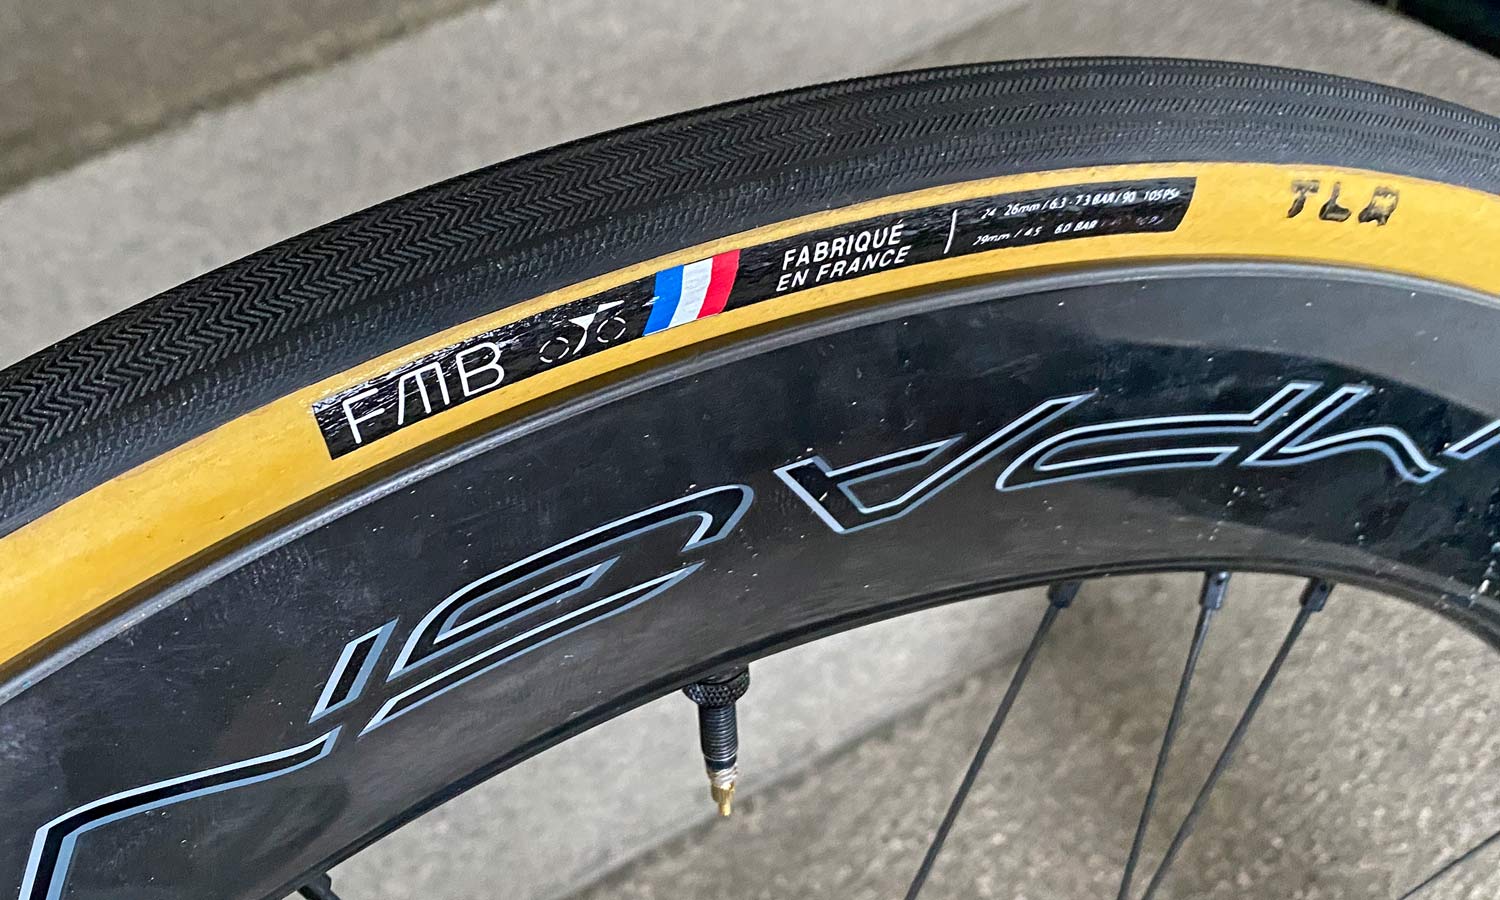 FMB Cobbles tubeless-ready TLR 29mm tire, handmade-in-France supple open-tubular tubeless clincher road bike tires, on Campagnolo Bora WTO 60 DB wheel